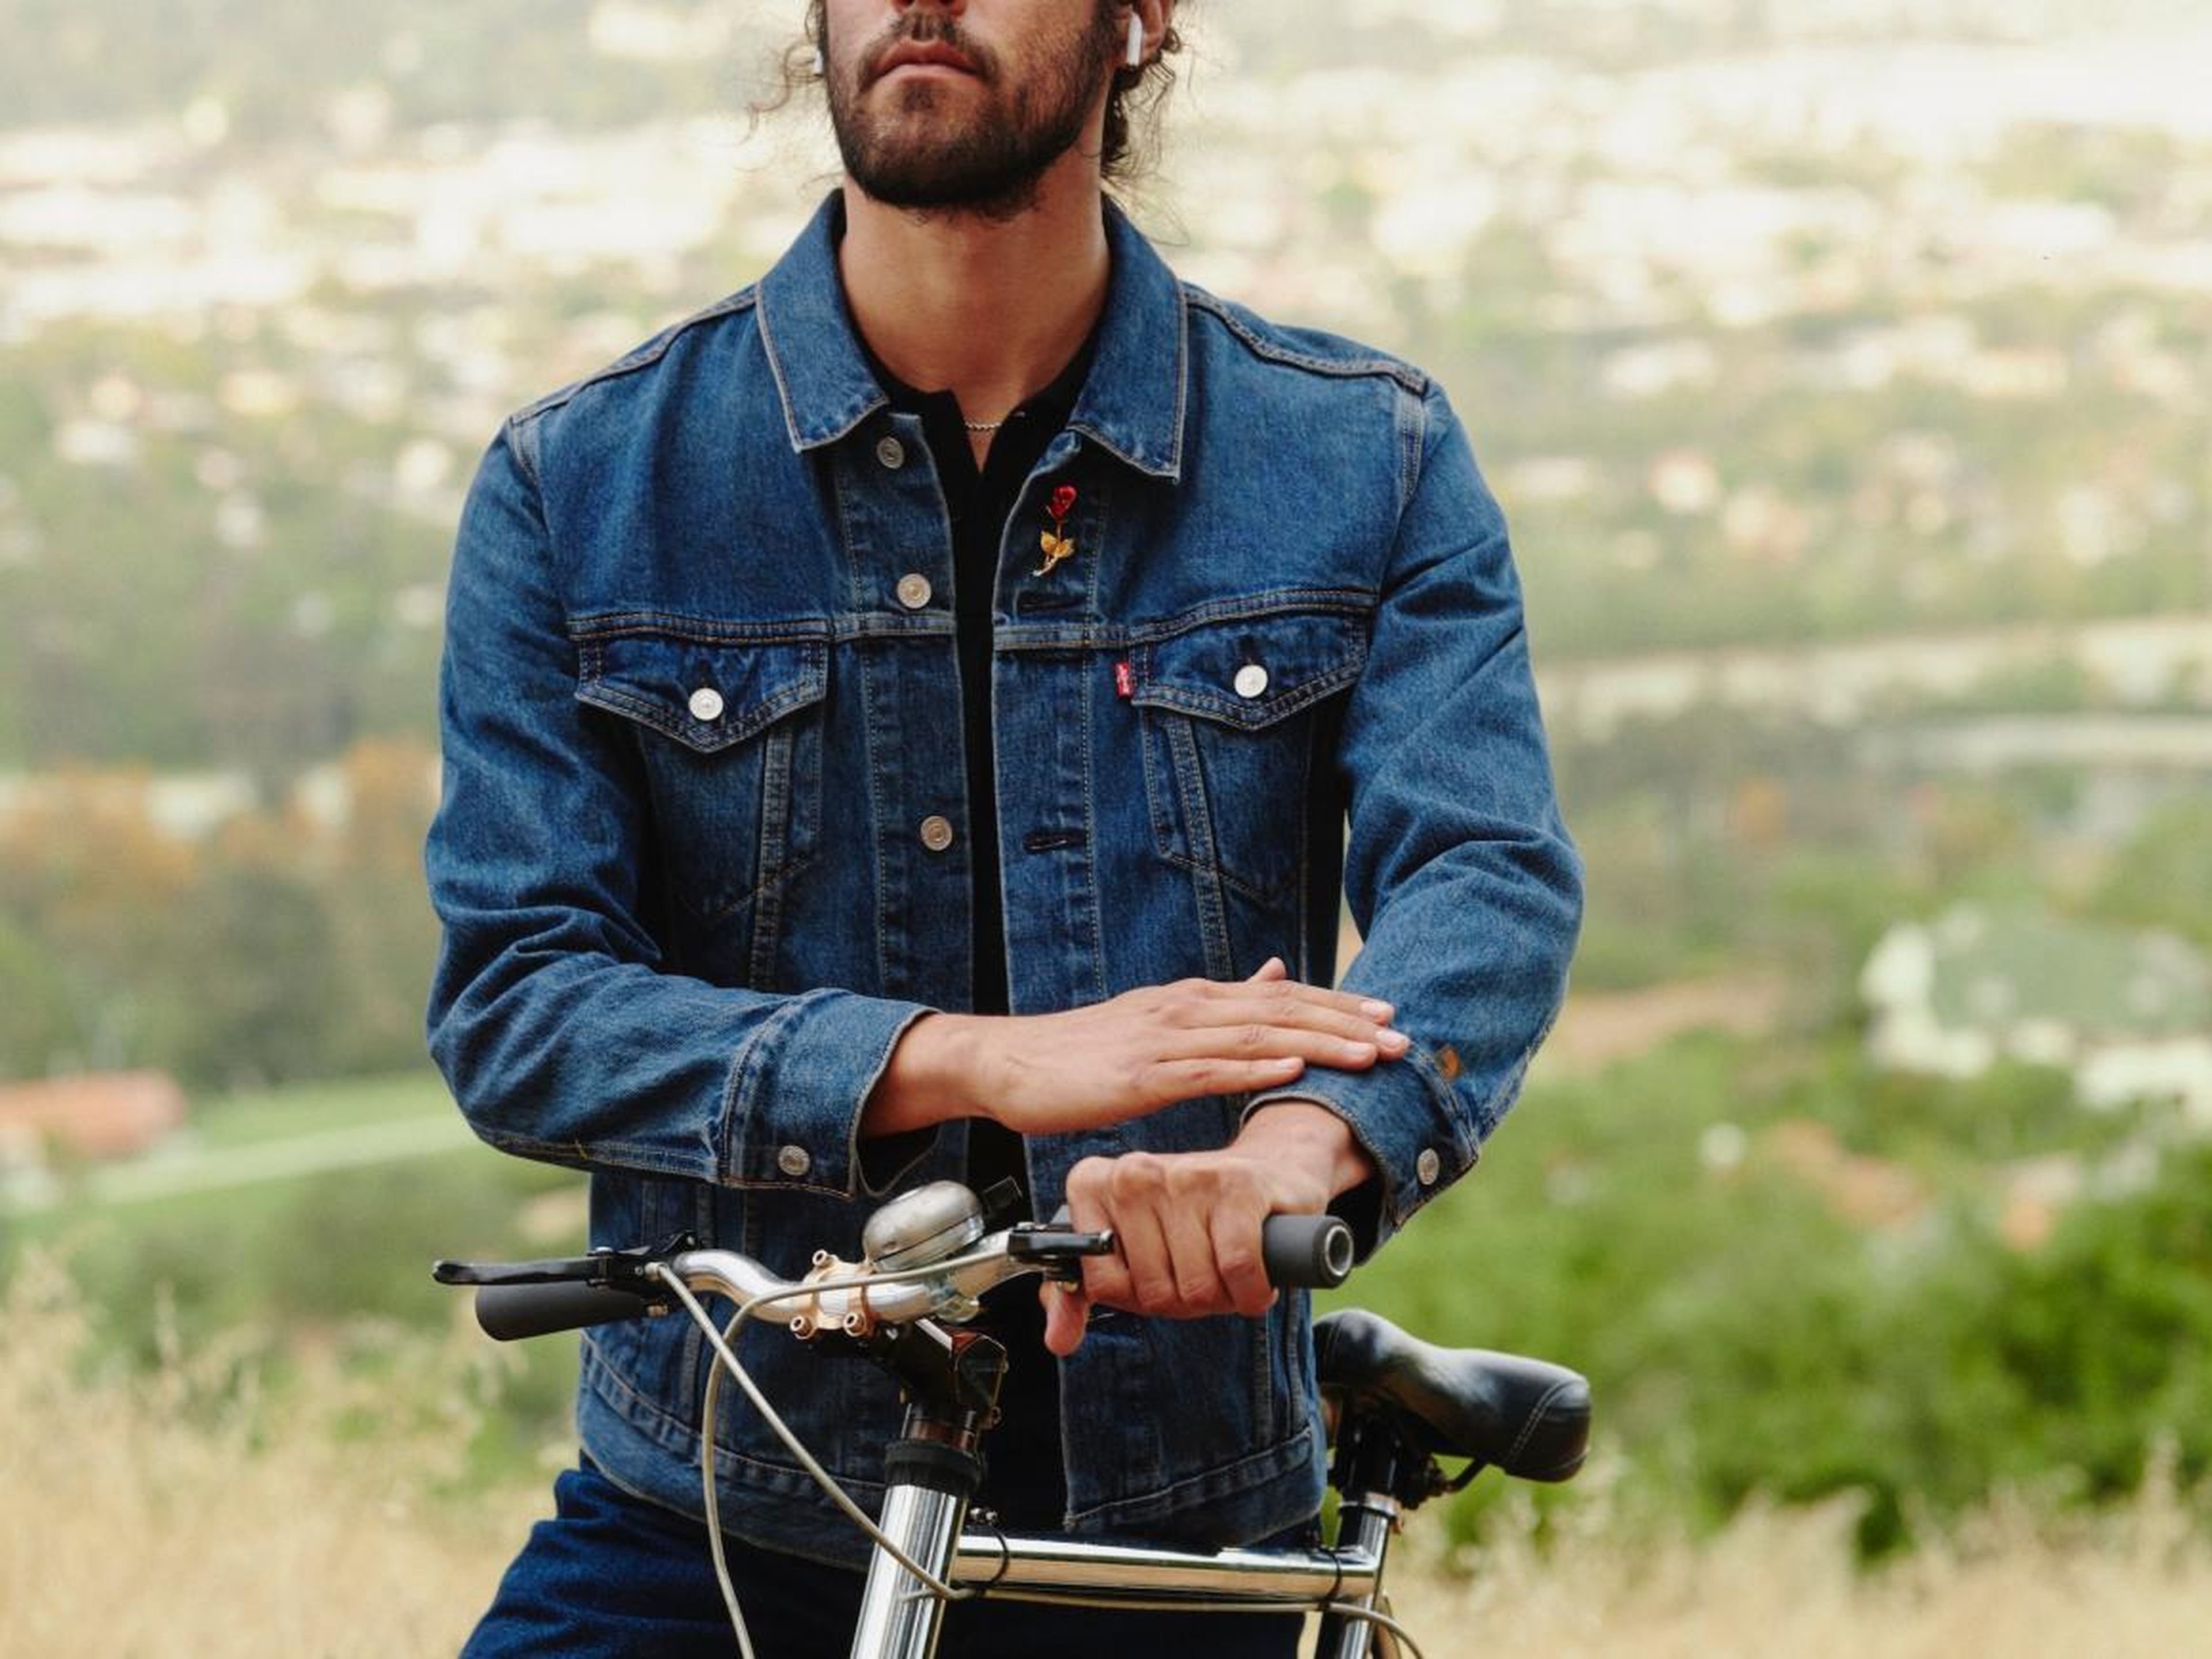 The Levi’s Trucker Jacket with Jacquard by Google starts at $198 and costs up to $248. It will be available sometime this fall in the US, UK, Australia, France, Germany, Italy, and Japan.